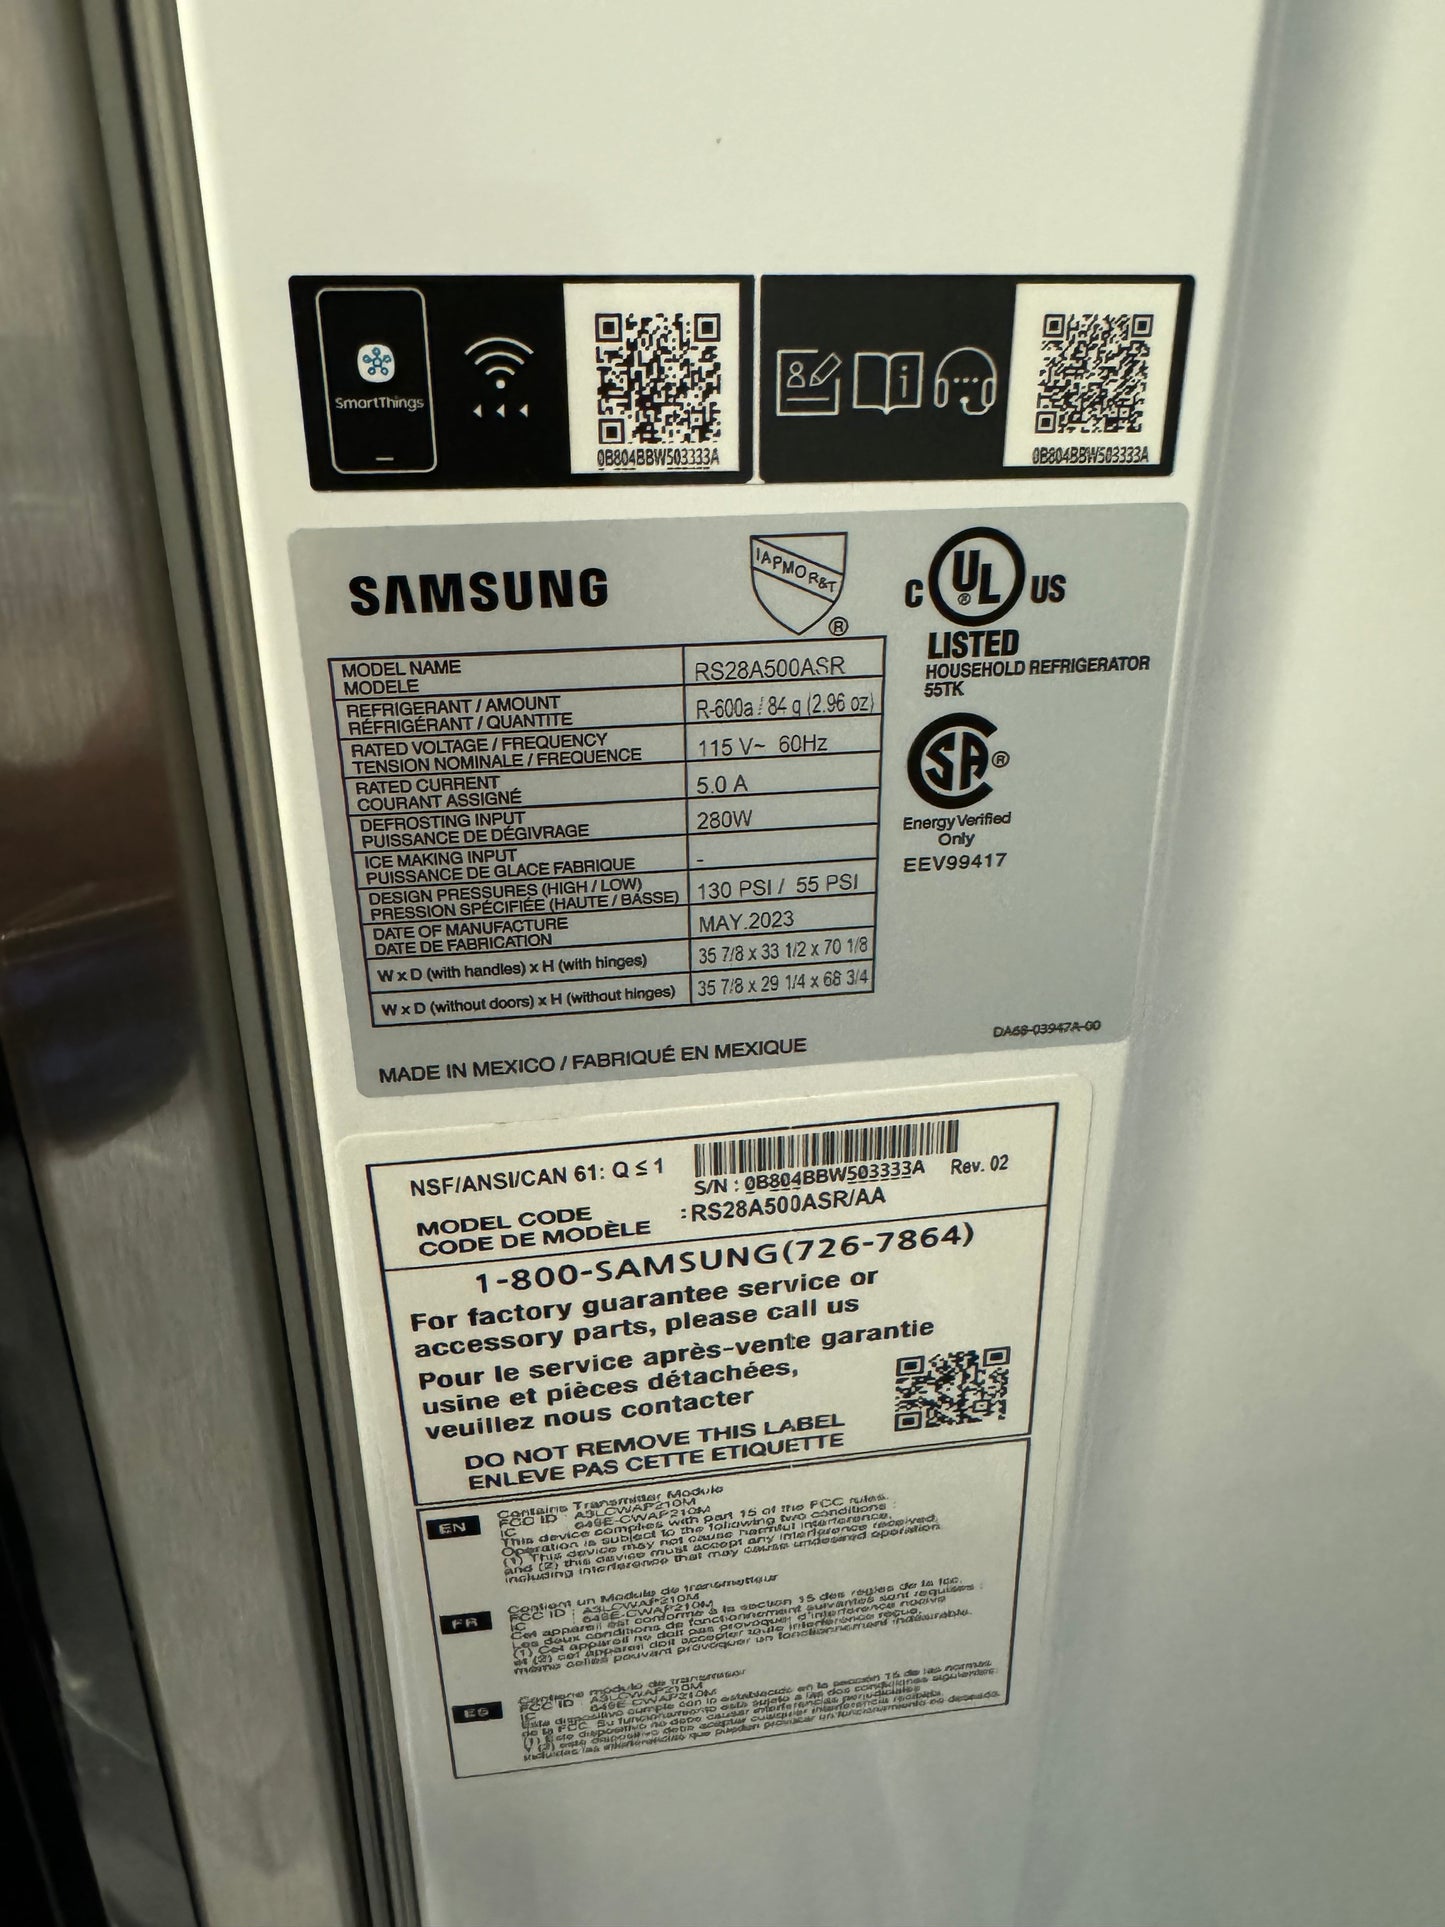 Samsung 28 cu. ft. Smart Side-by-Side Refrigerator in Stainless Steel (has dents)